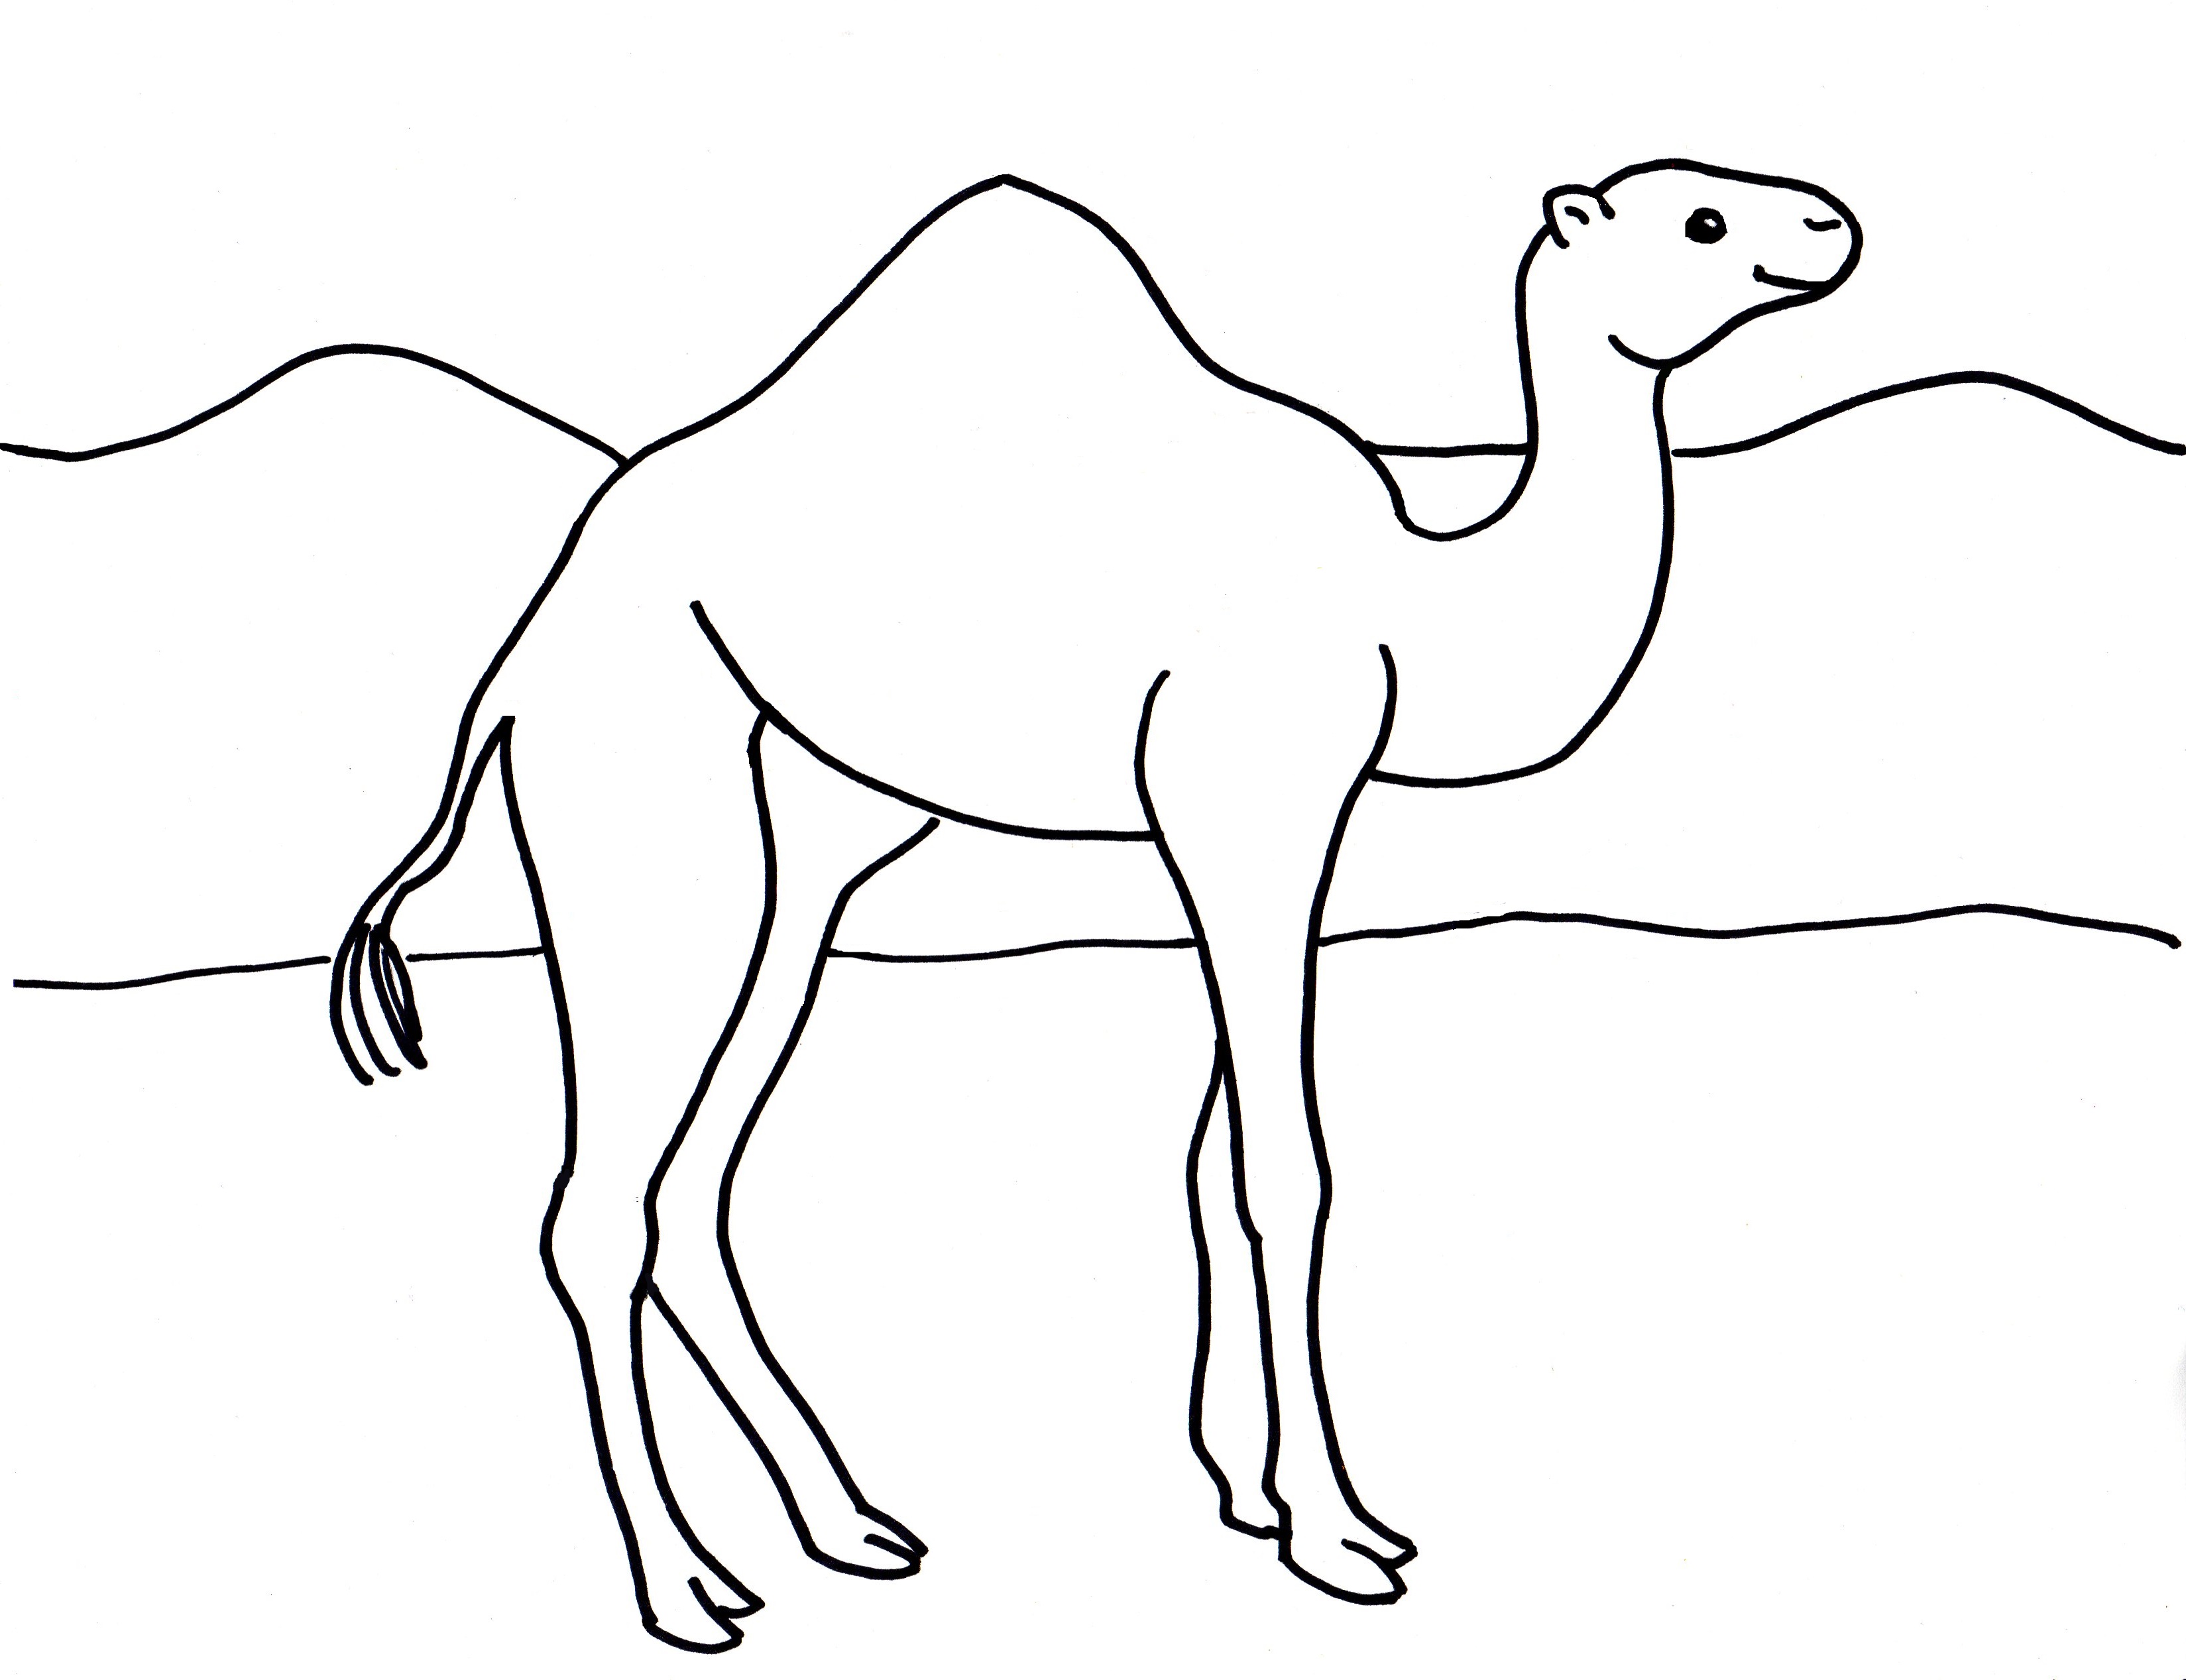 camel-coloring-page-art-starts